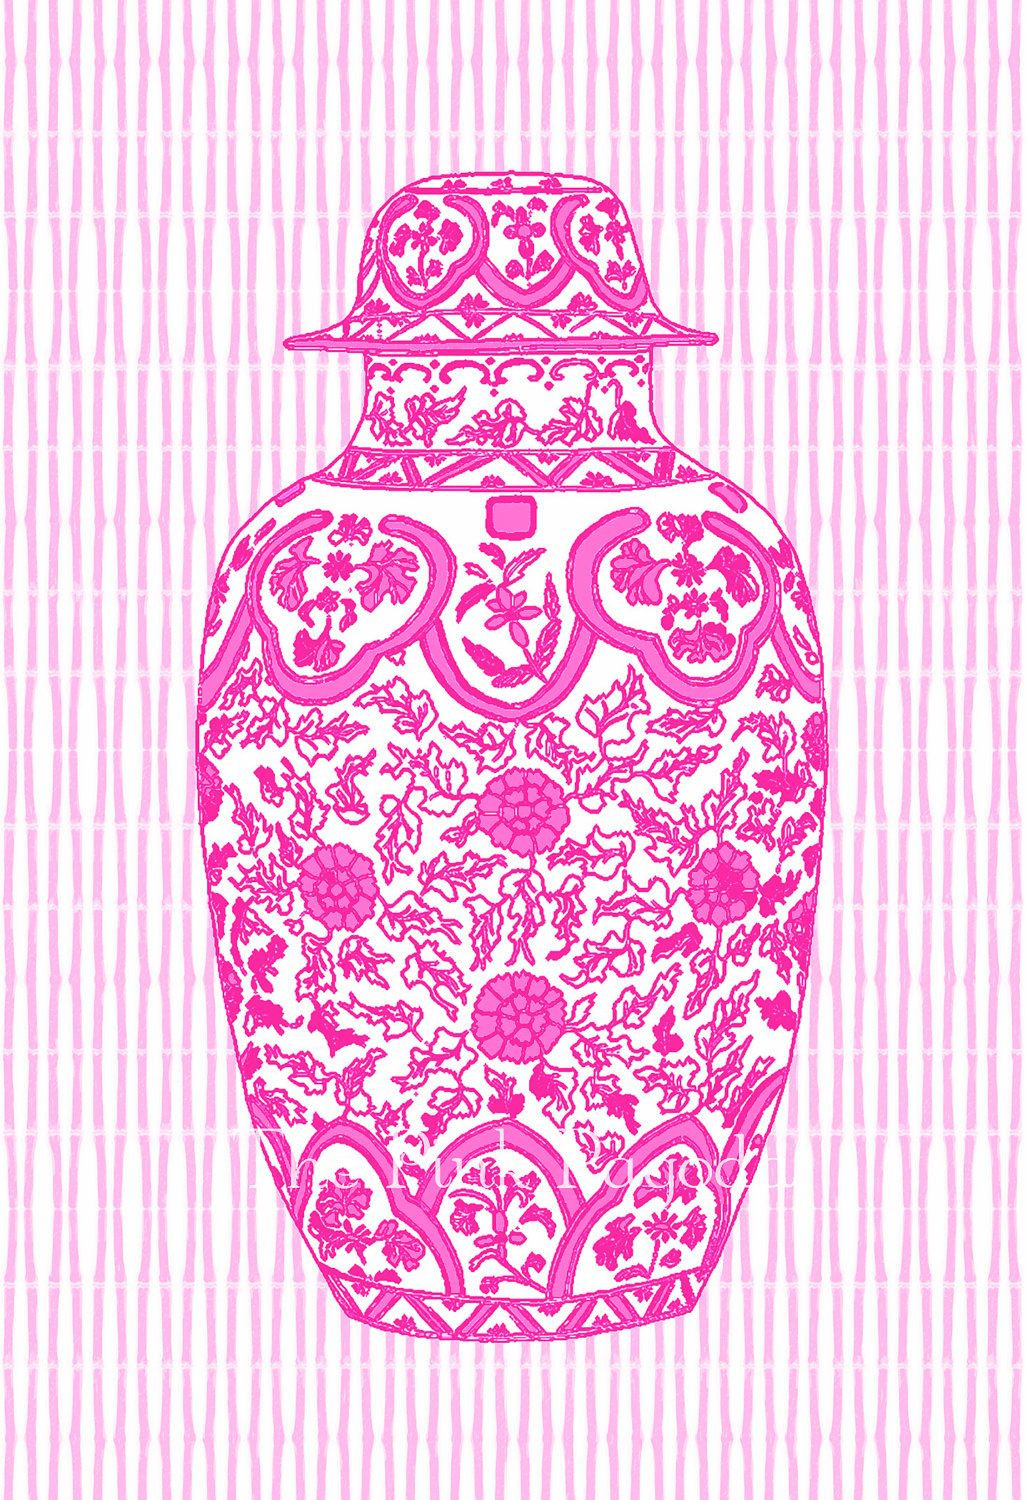 10 Stylish Hot Pink Flower Vases 2022 free download hot pink flower vases of hot pink ming chinoiserie ginger jar on bamboo stripe giclee pertaining to hot pink ming chinoiserie ginger jar on bamboo stripe 11x14 giclee the pink pagoda